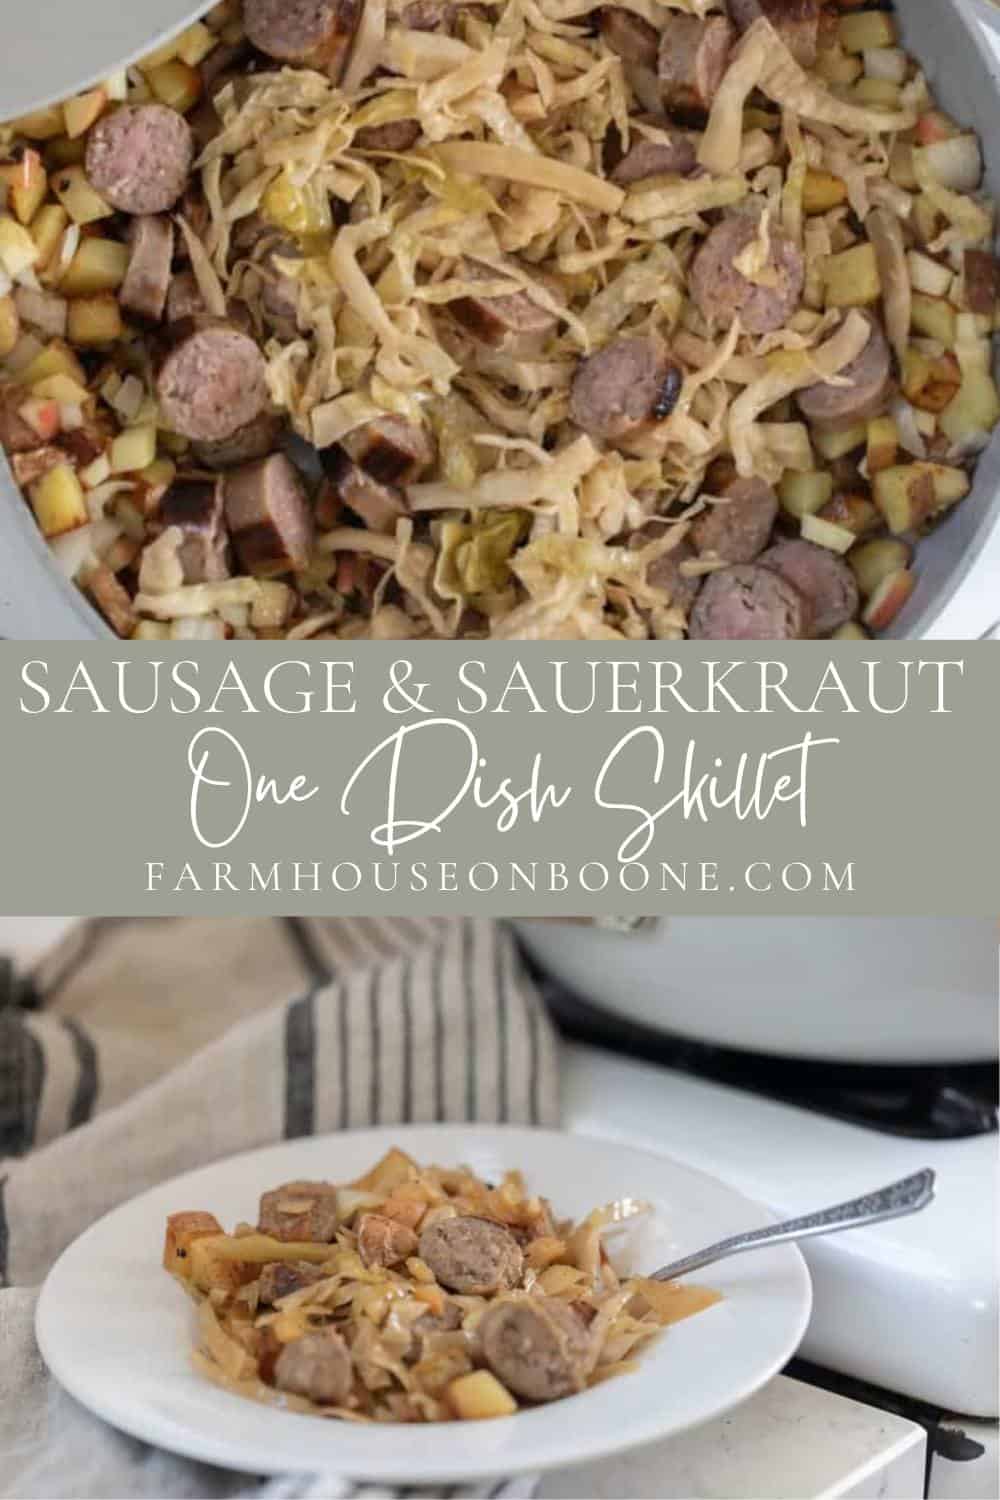 Sausage and Sauerkraut Skillet Recipe with Potatoes - Farmhouse on Boone